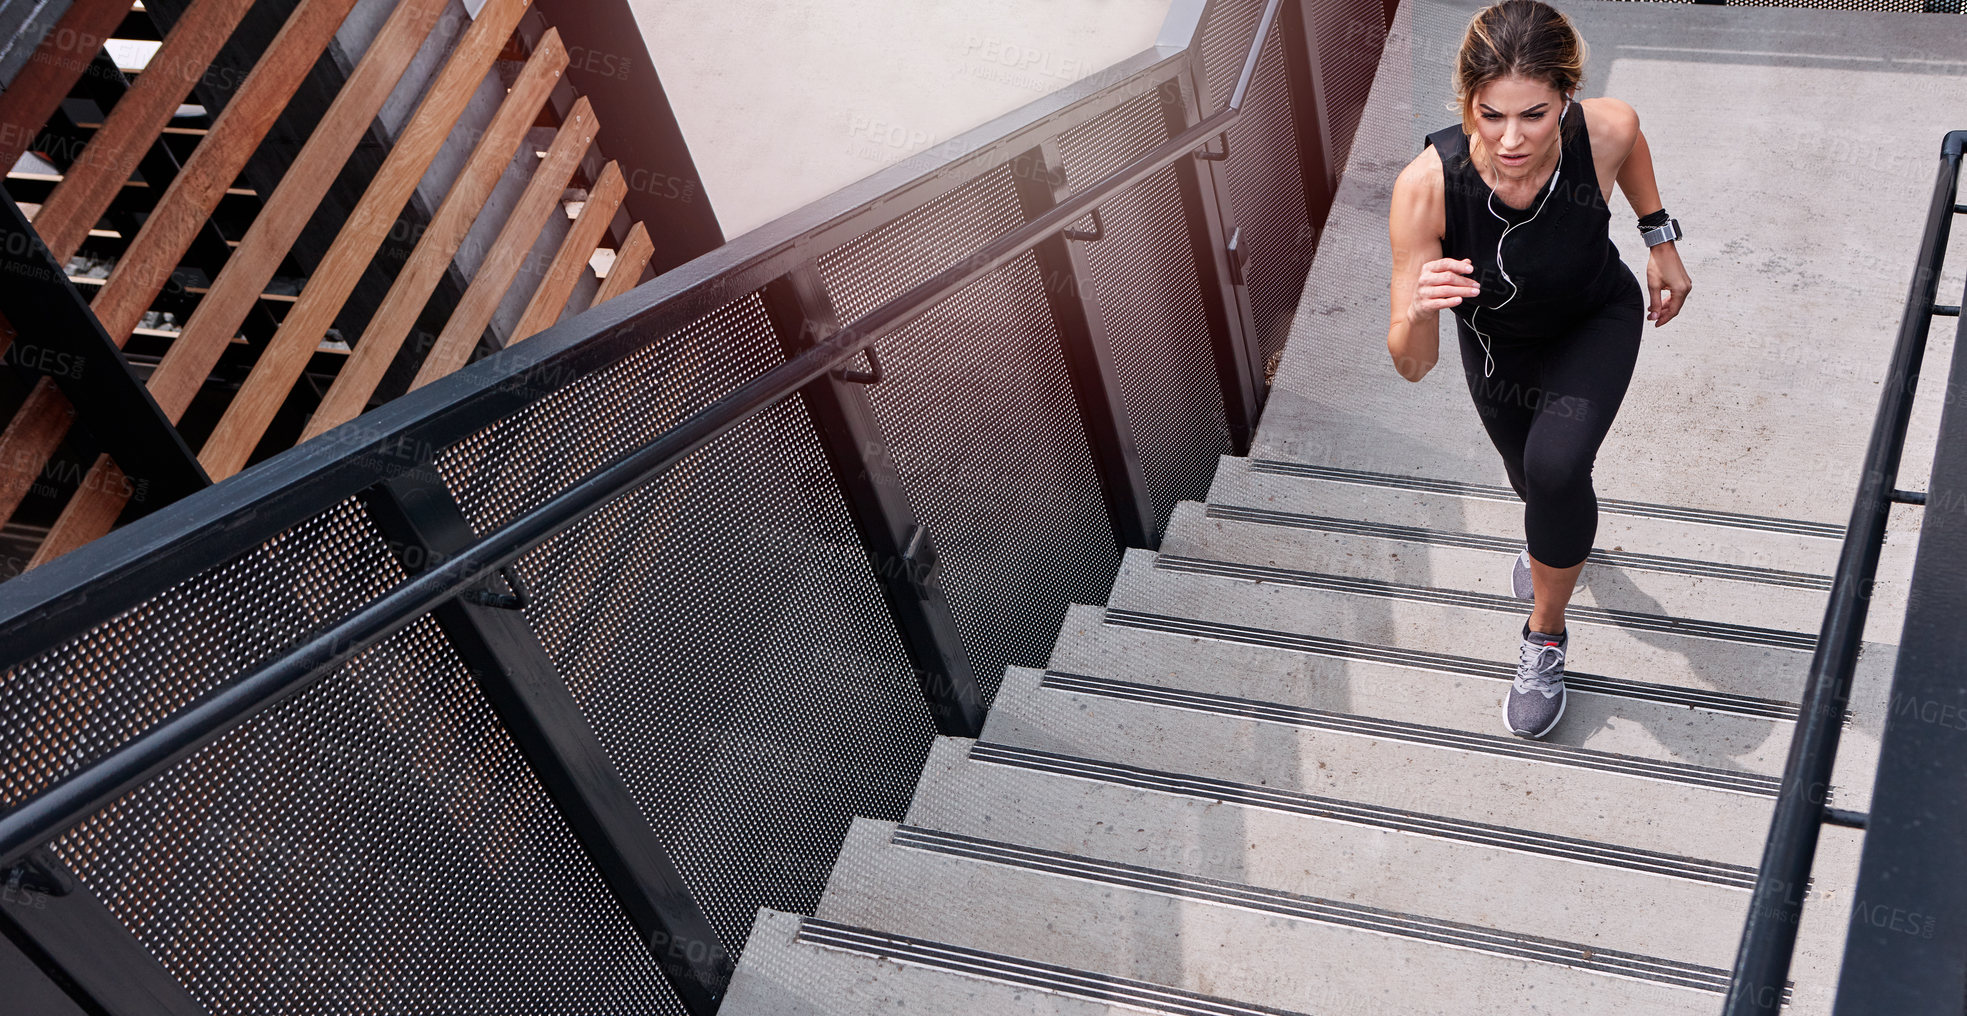 Buy stock photo High angle shot of a sporty young woman running up a staircase outdoors